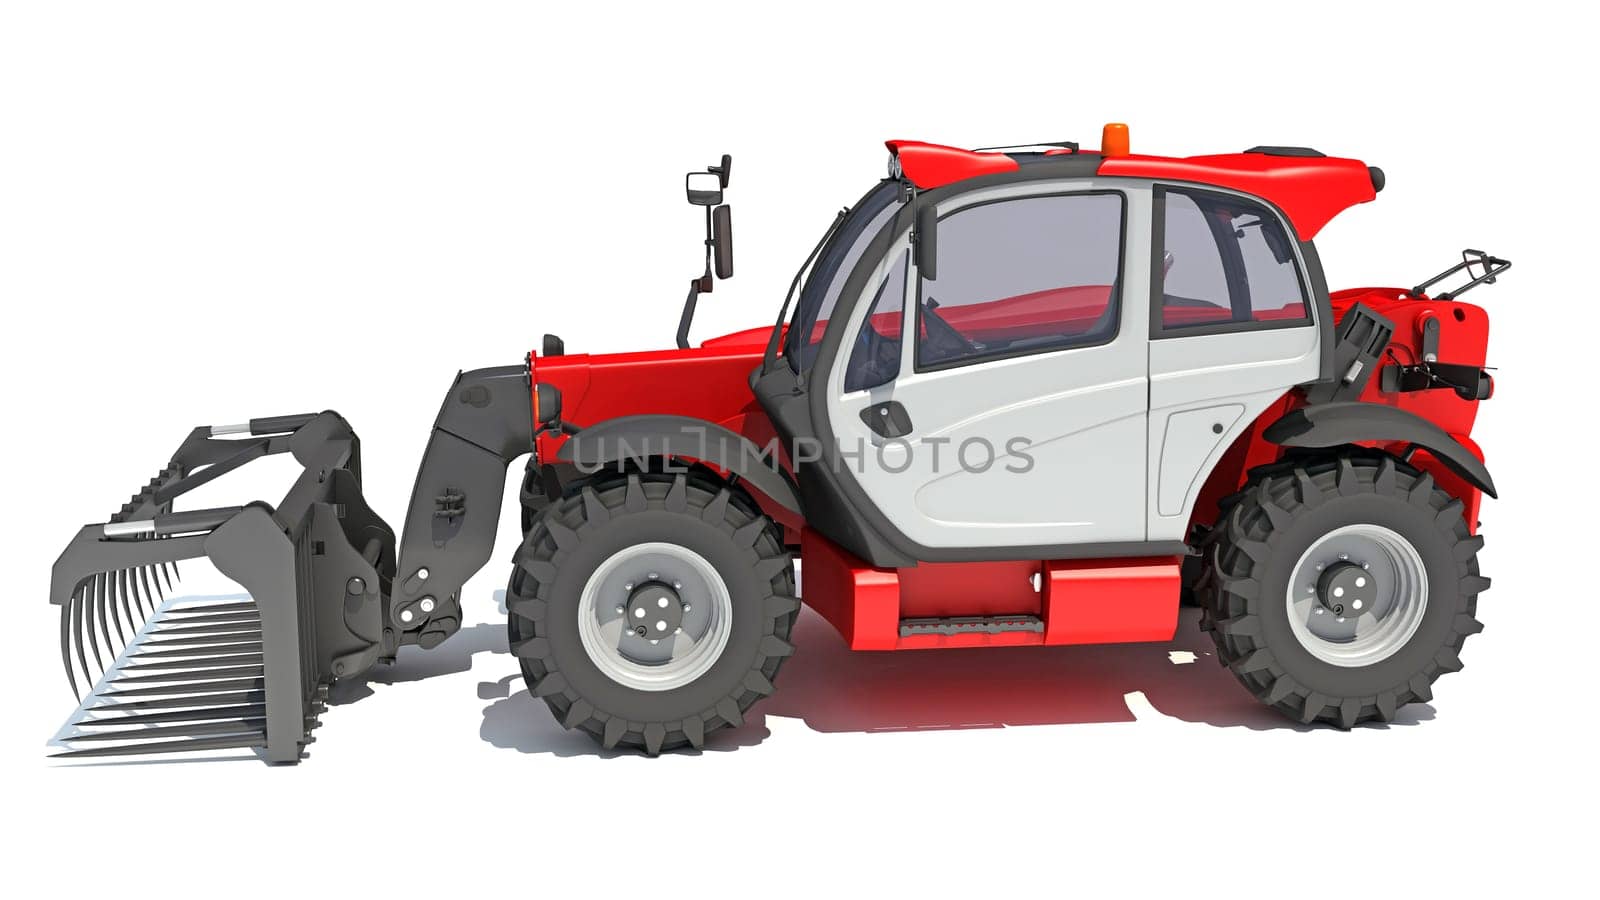 Telehandler heavy construction machinery 3D rendering on white background by 3DHorse